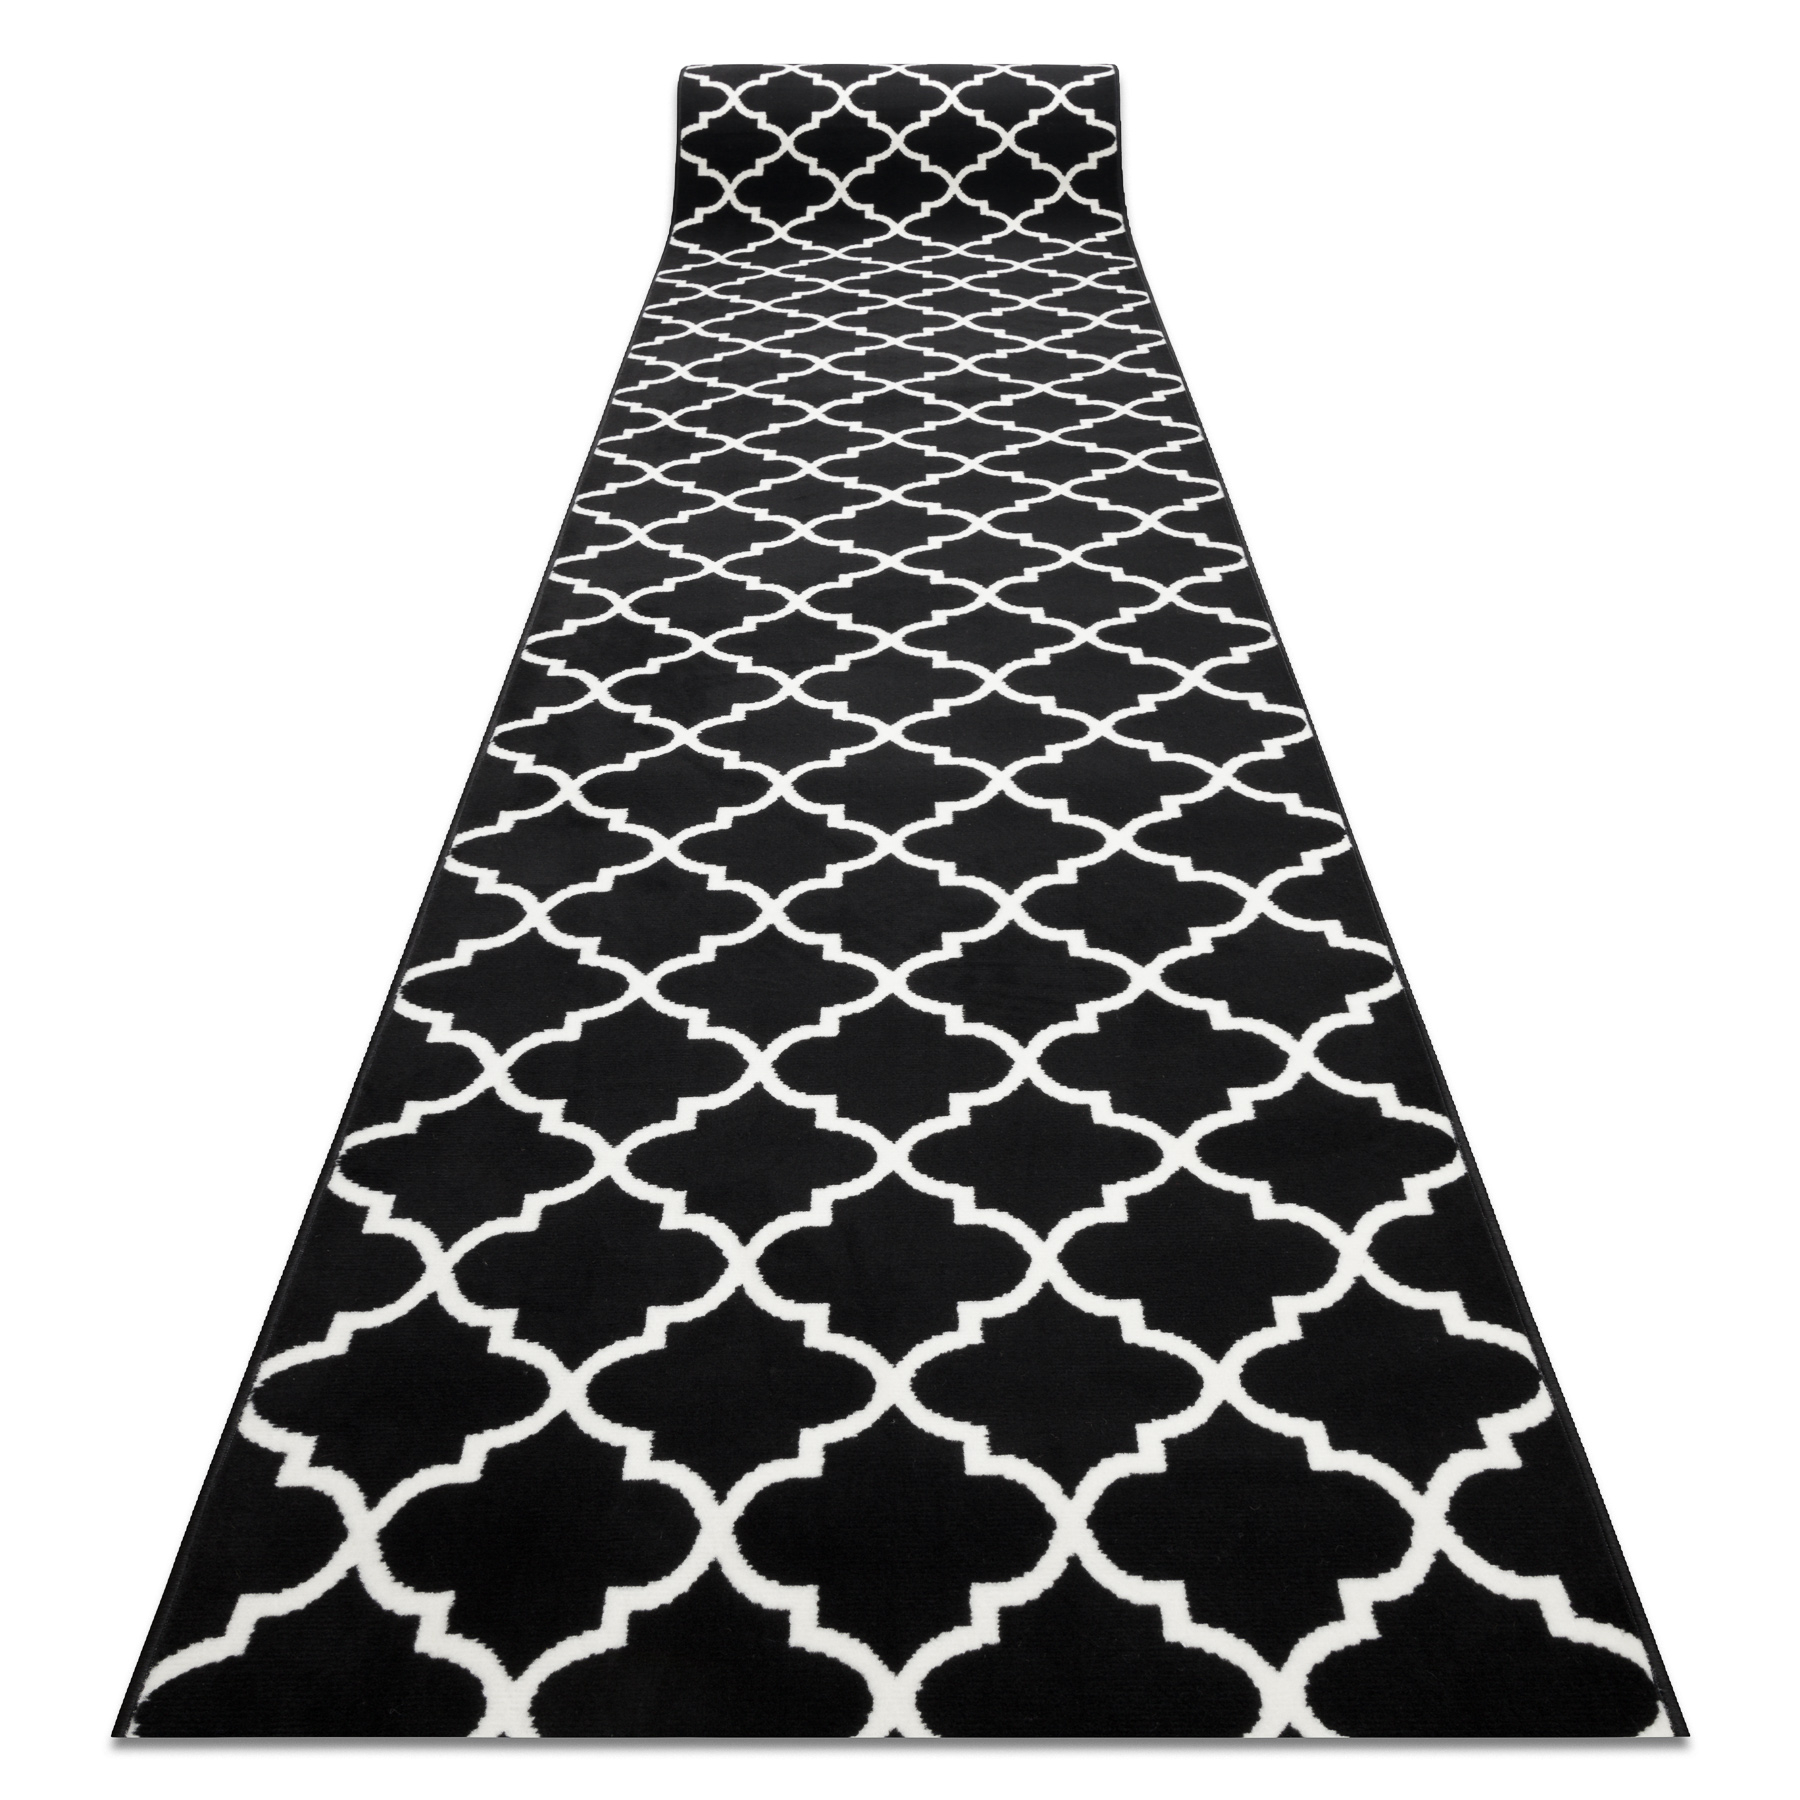 Very Thick Hall Runner SHADOW 8649 Width 70-120cm extra long Soft Densely RUGS 